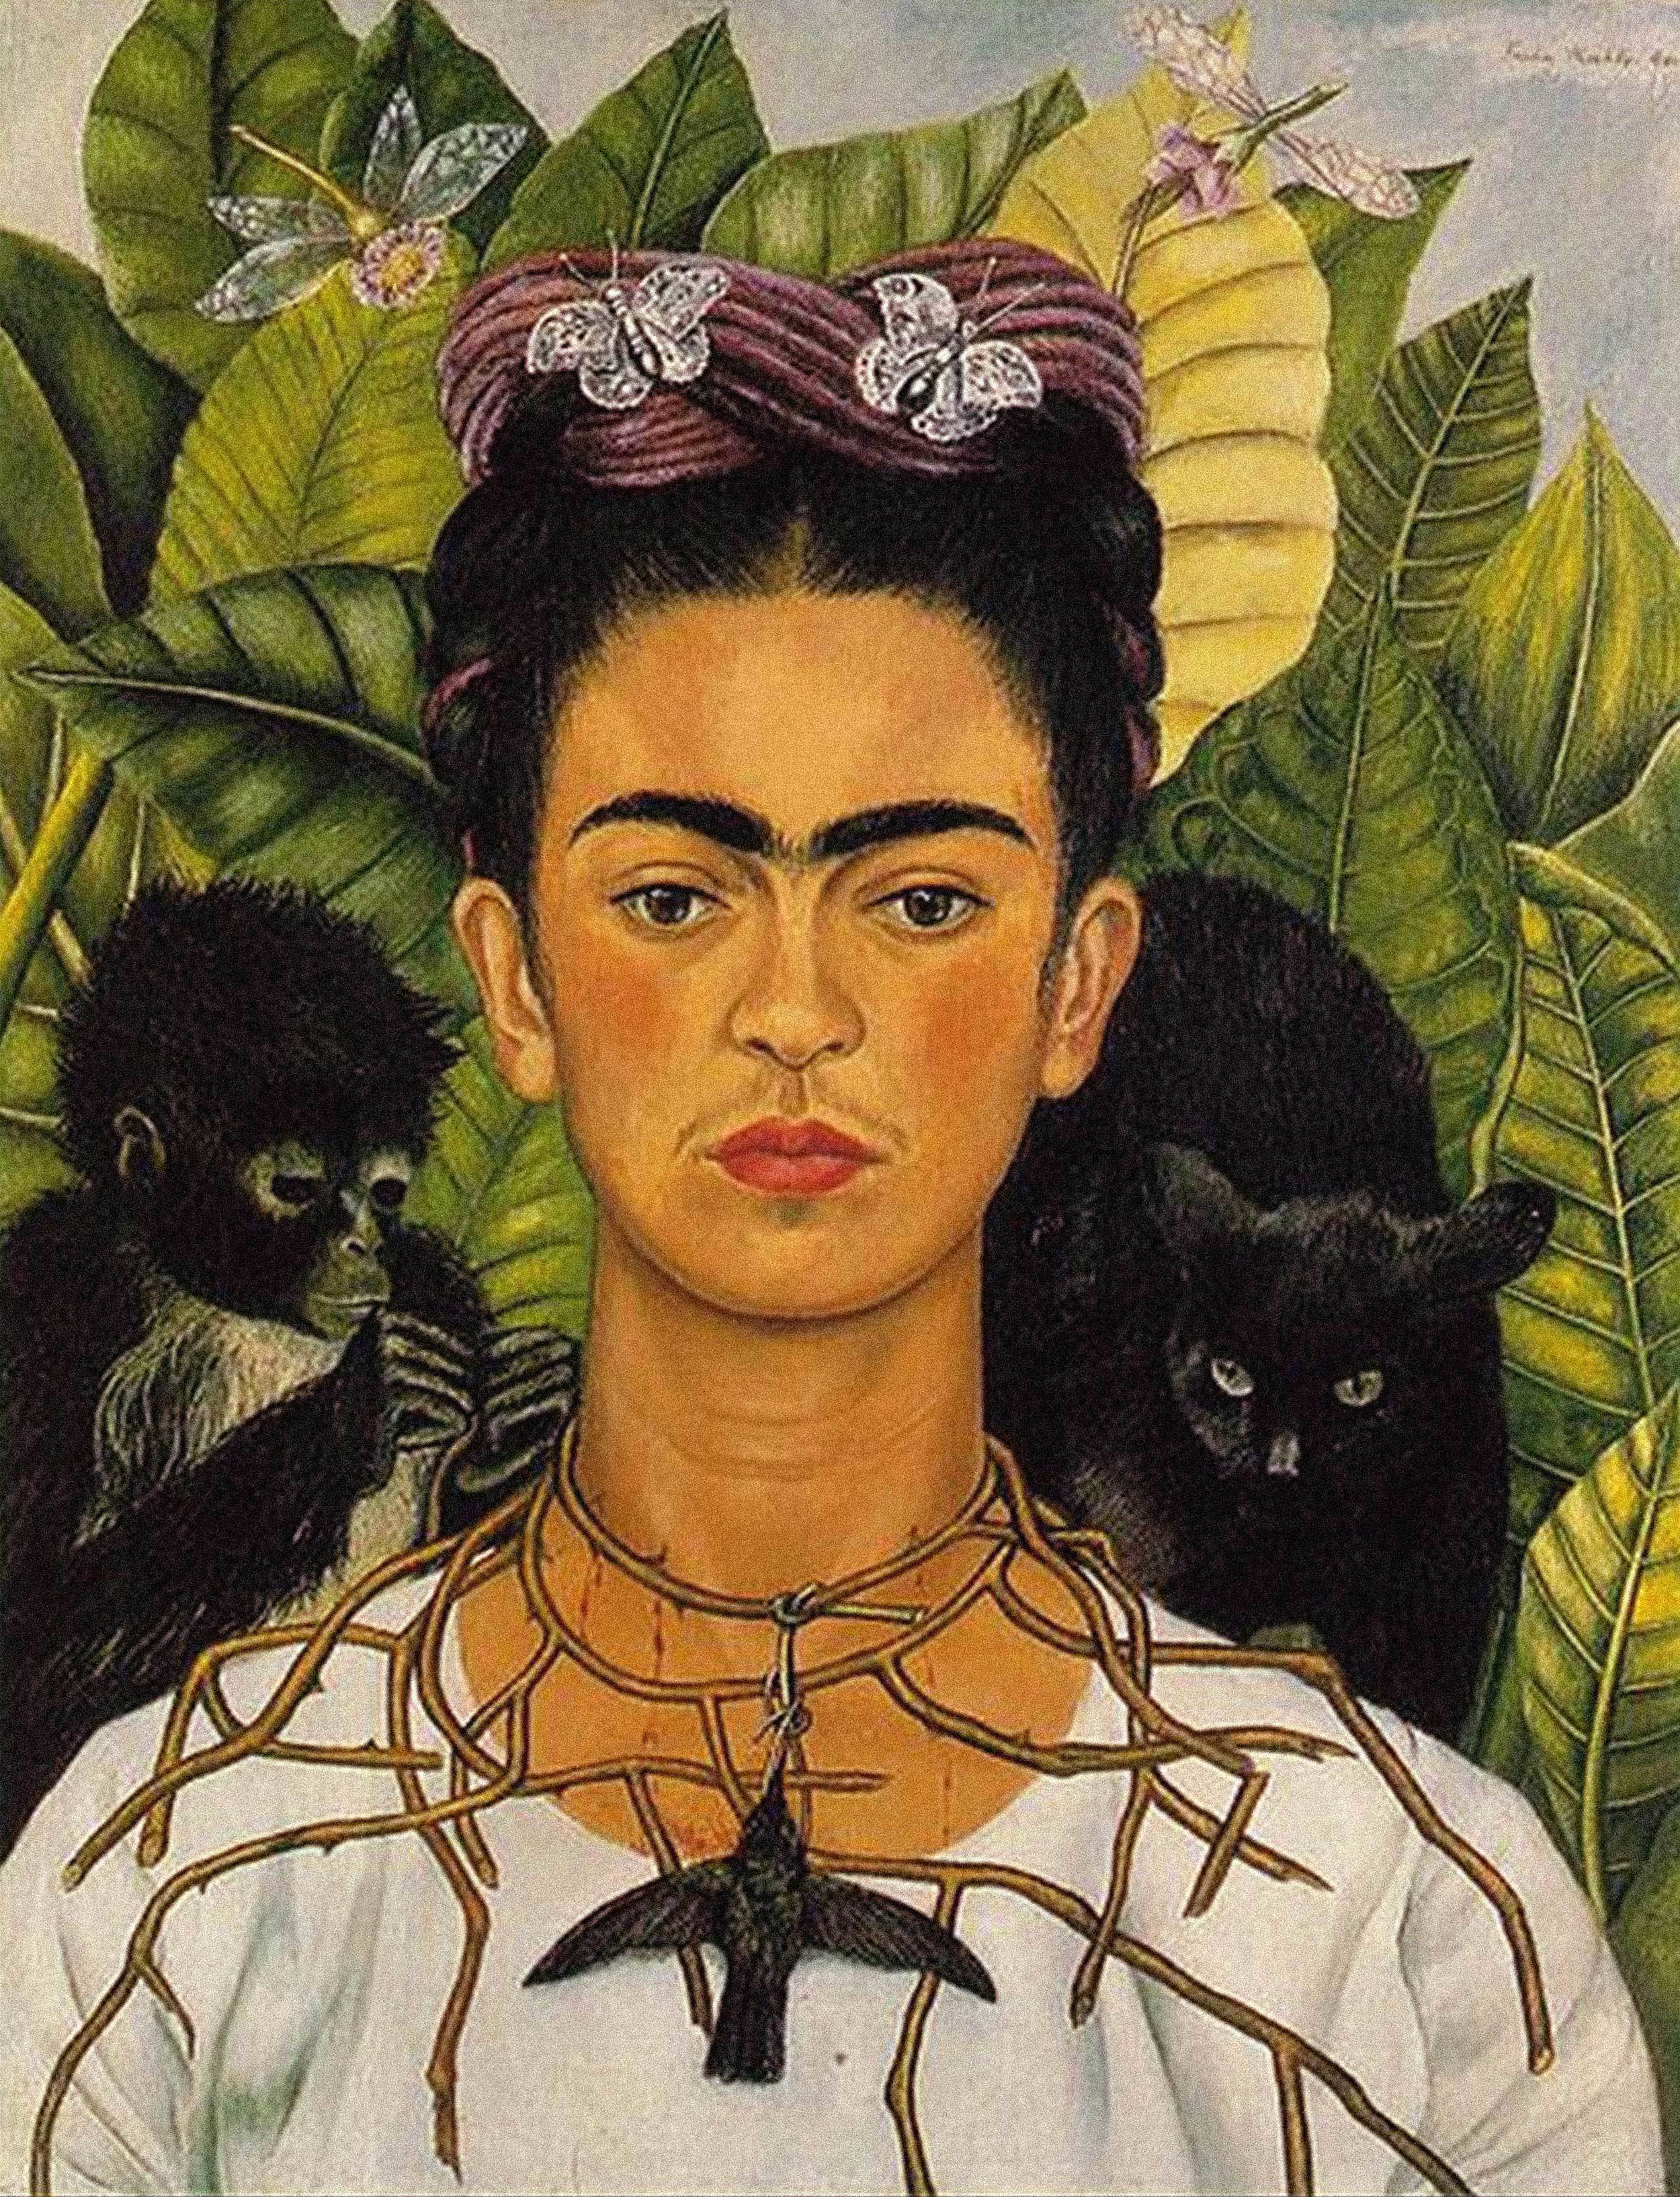 Frida Kahlo -  Self-portrait with Thorn Necklace and Hummingbird, 1940